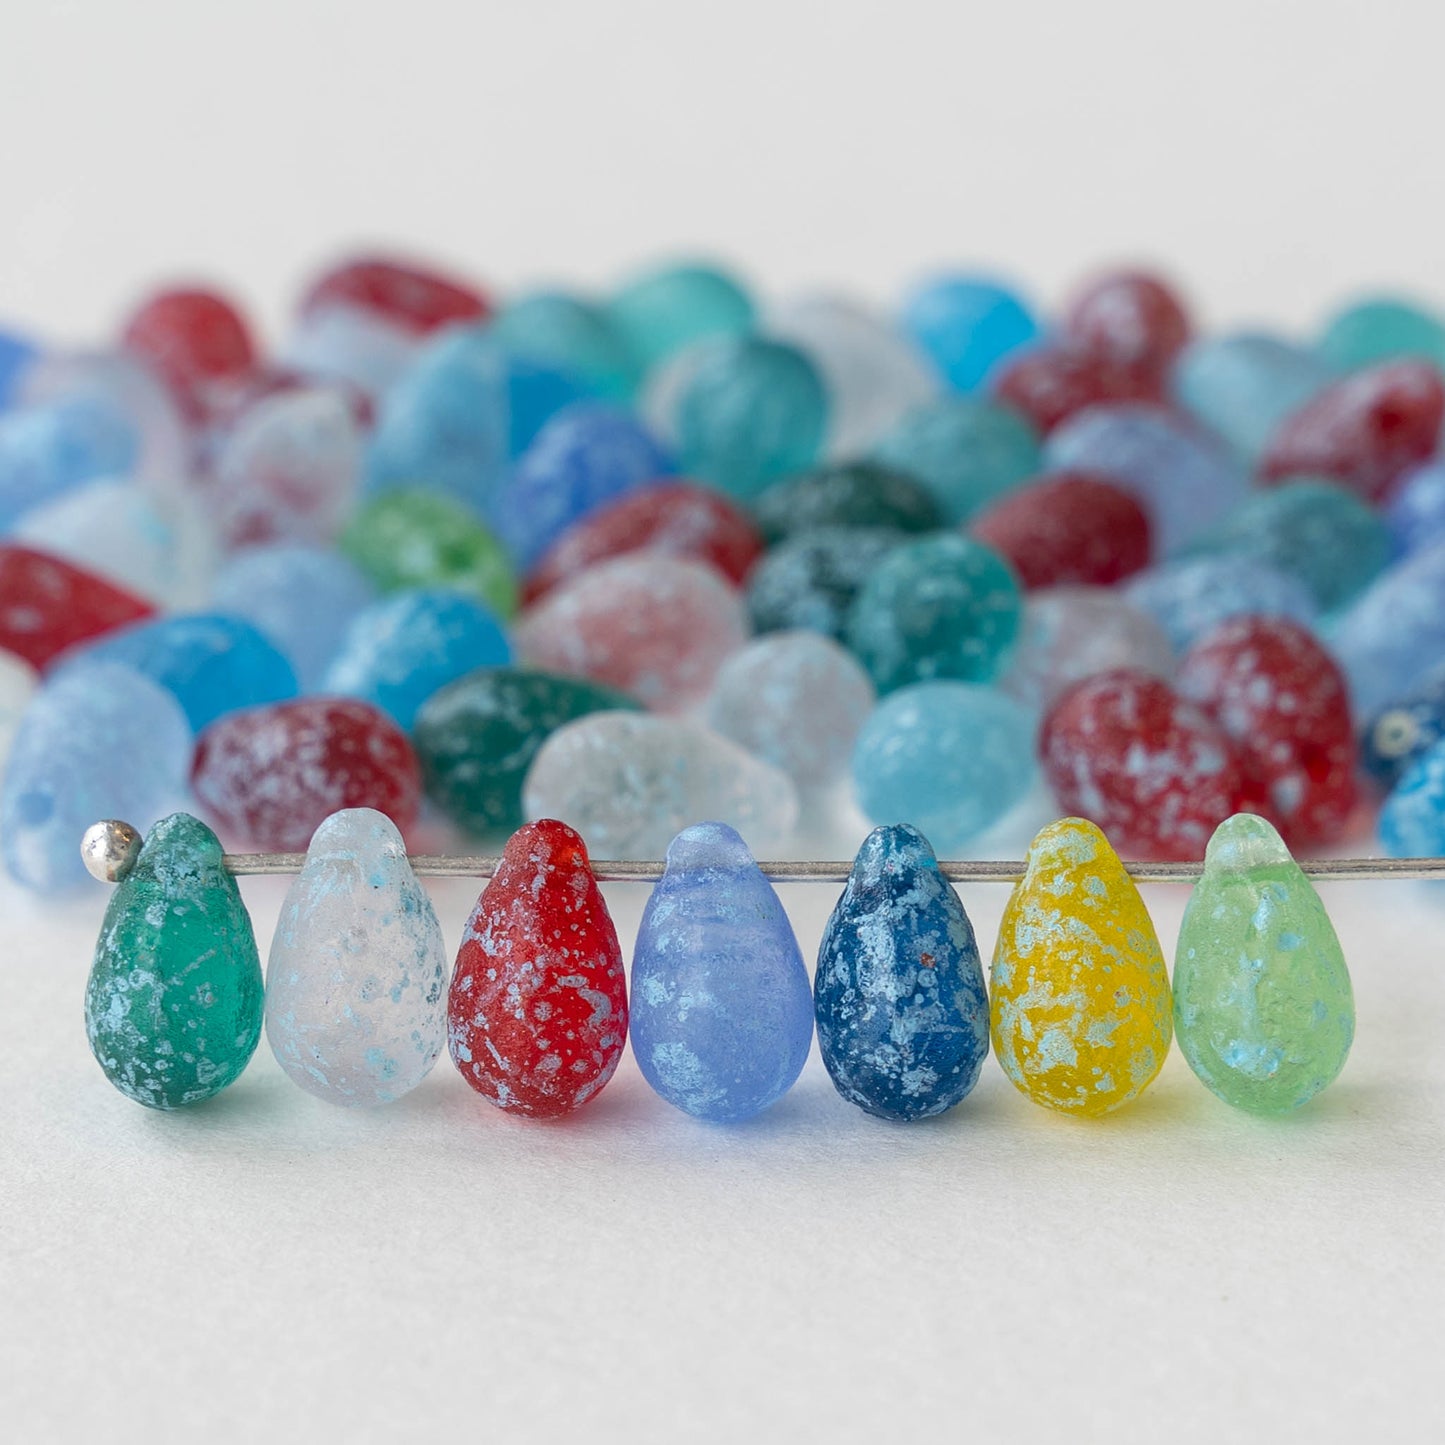 6x9mm Glass Teardrop Beads - Colorful Mix - 30 Beads